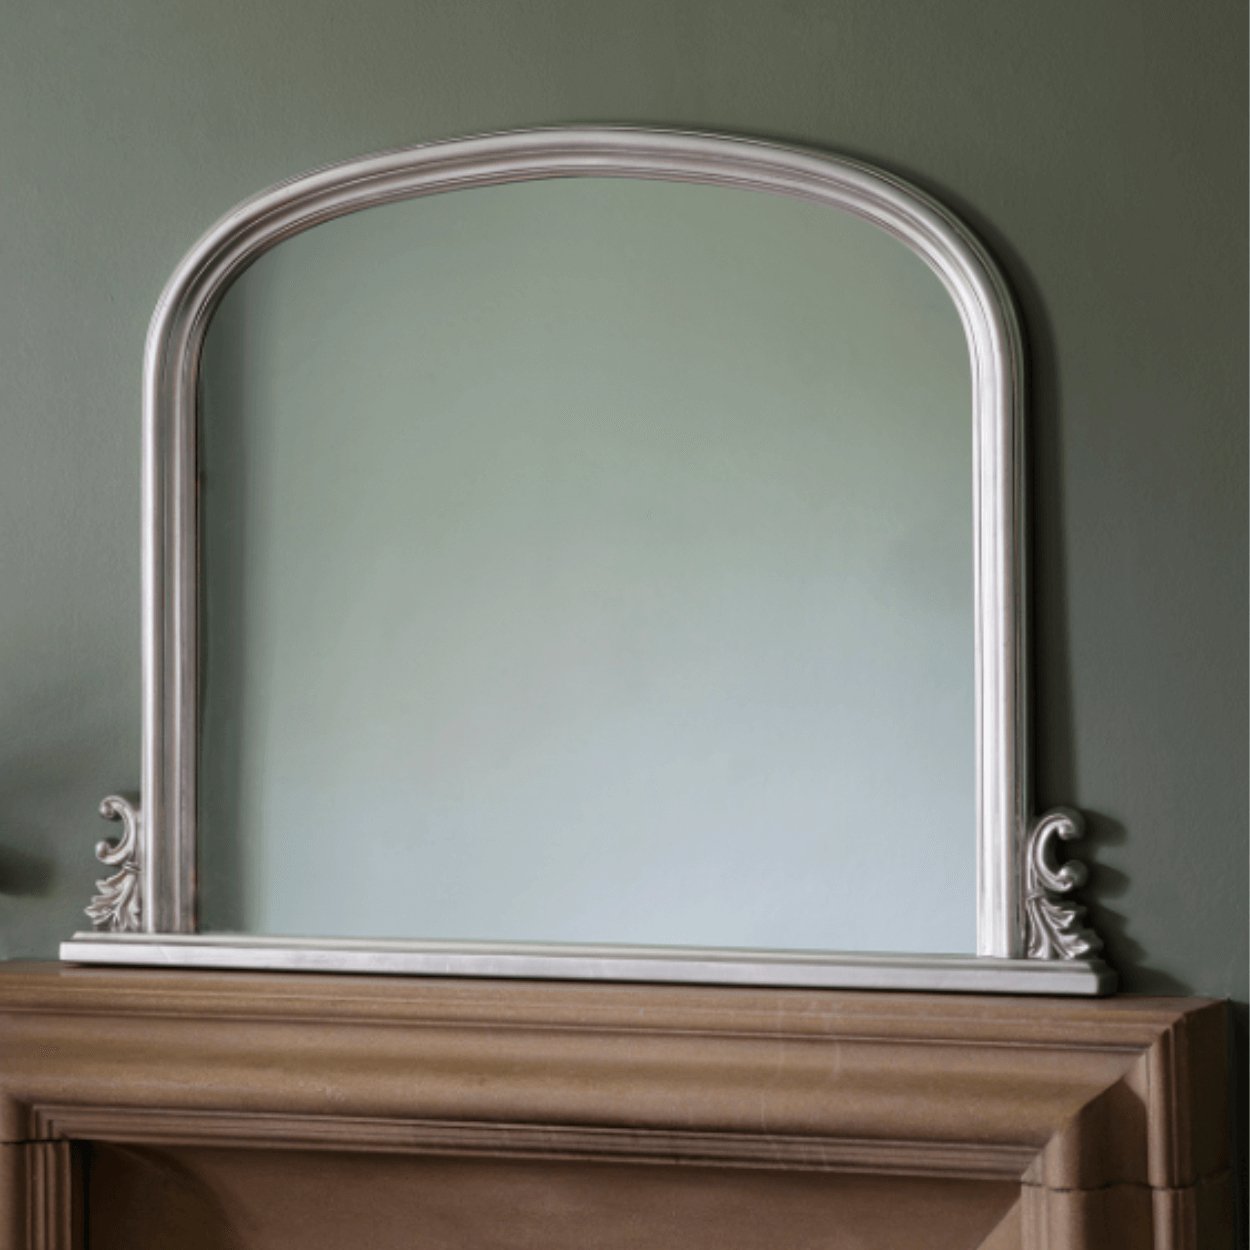 thornby silver arched mirror sitting on top of fireplace mantel